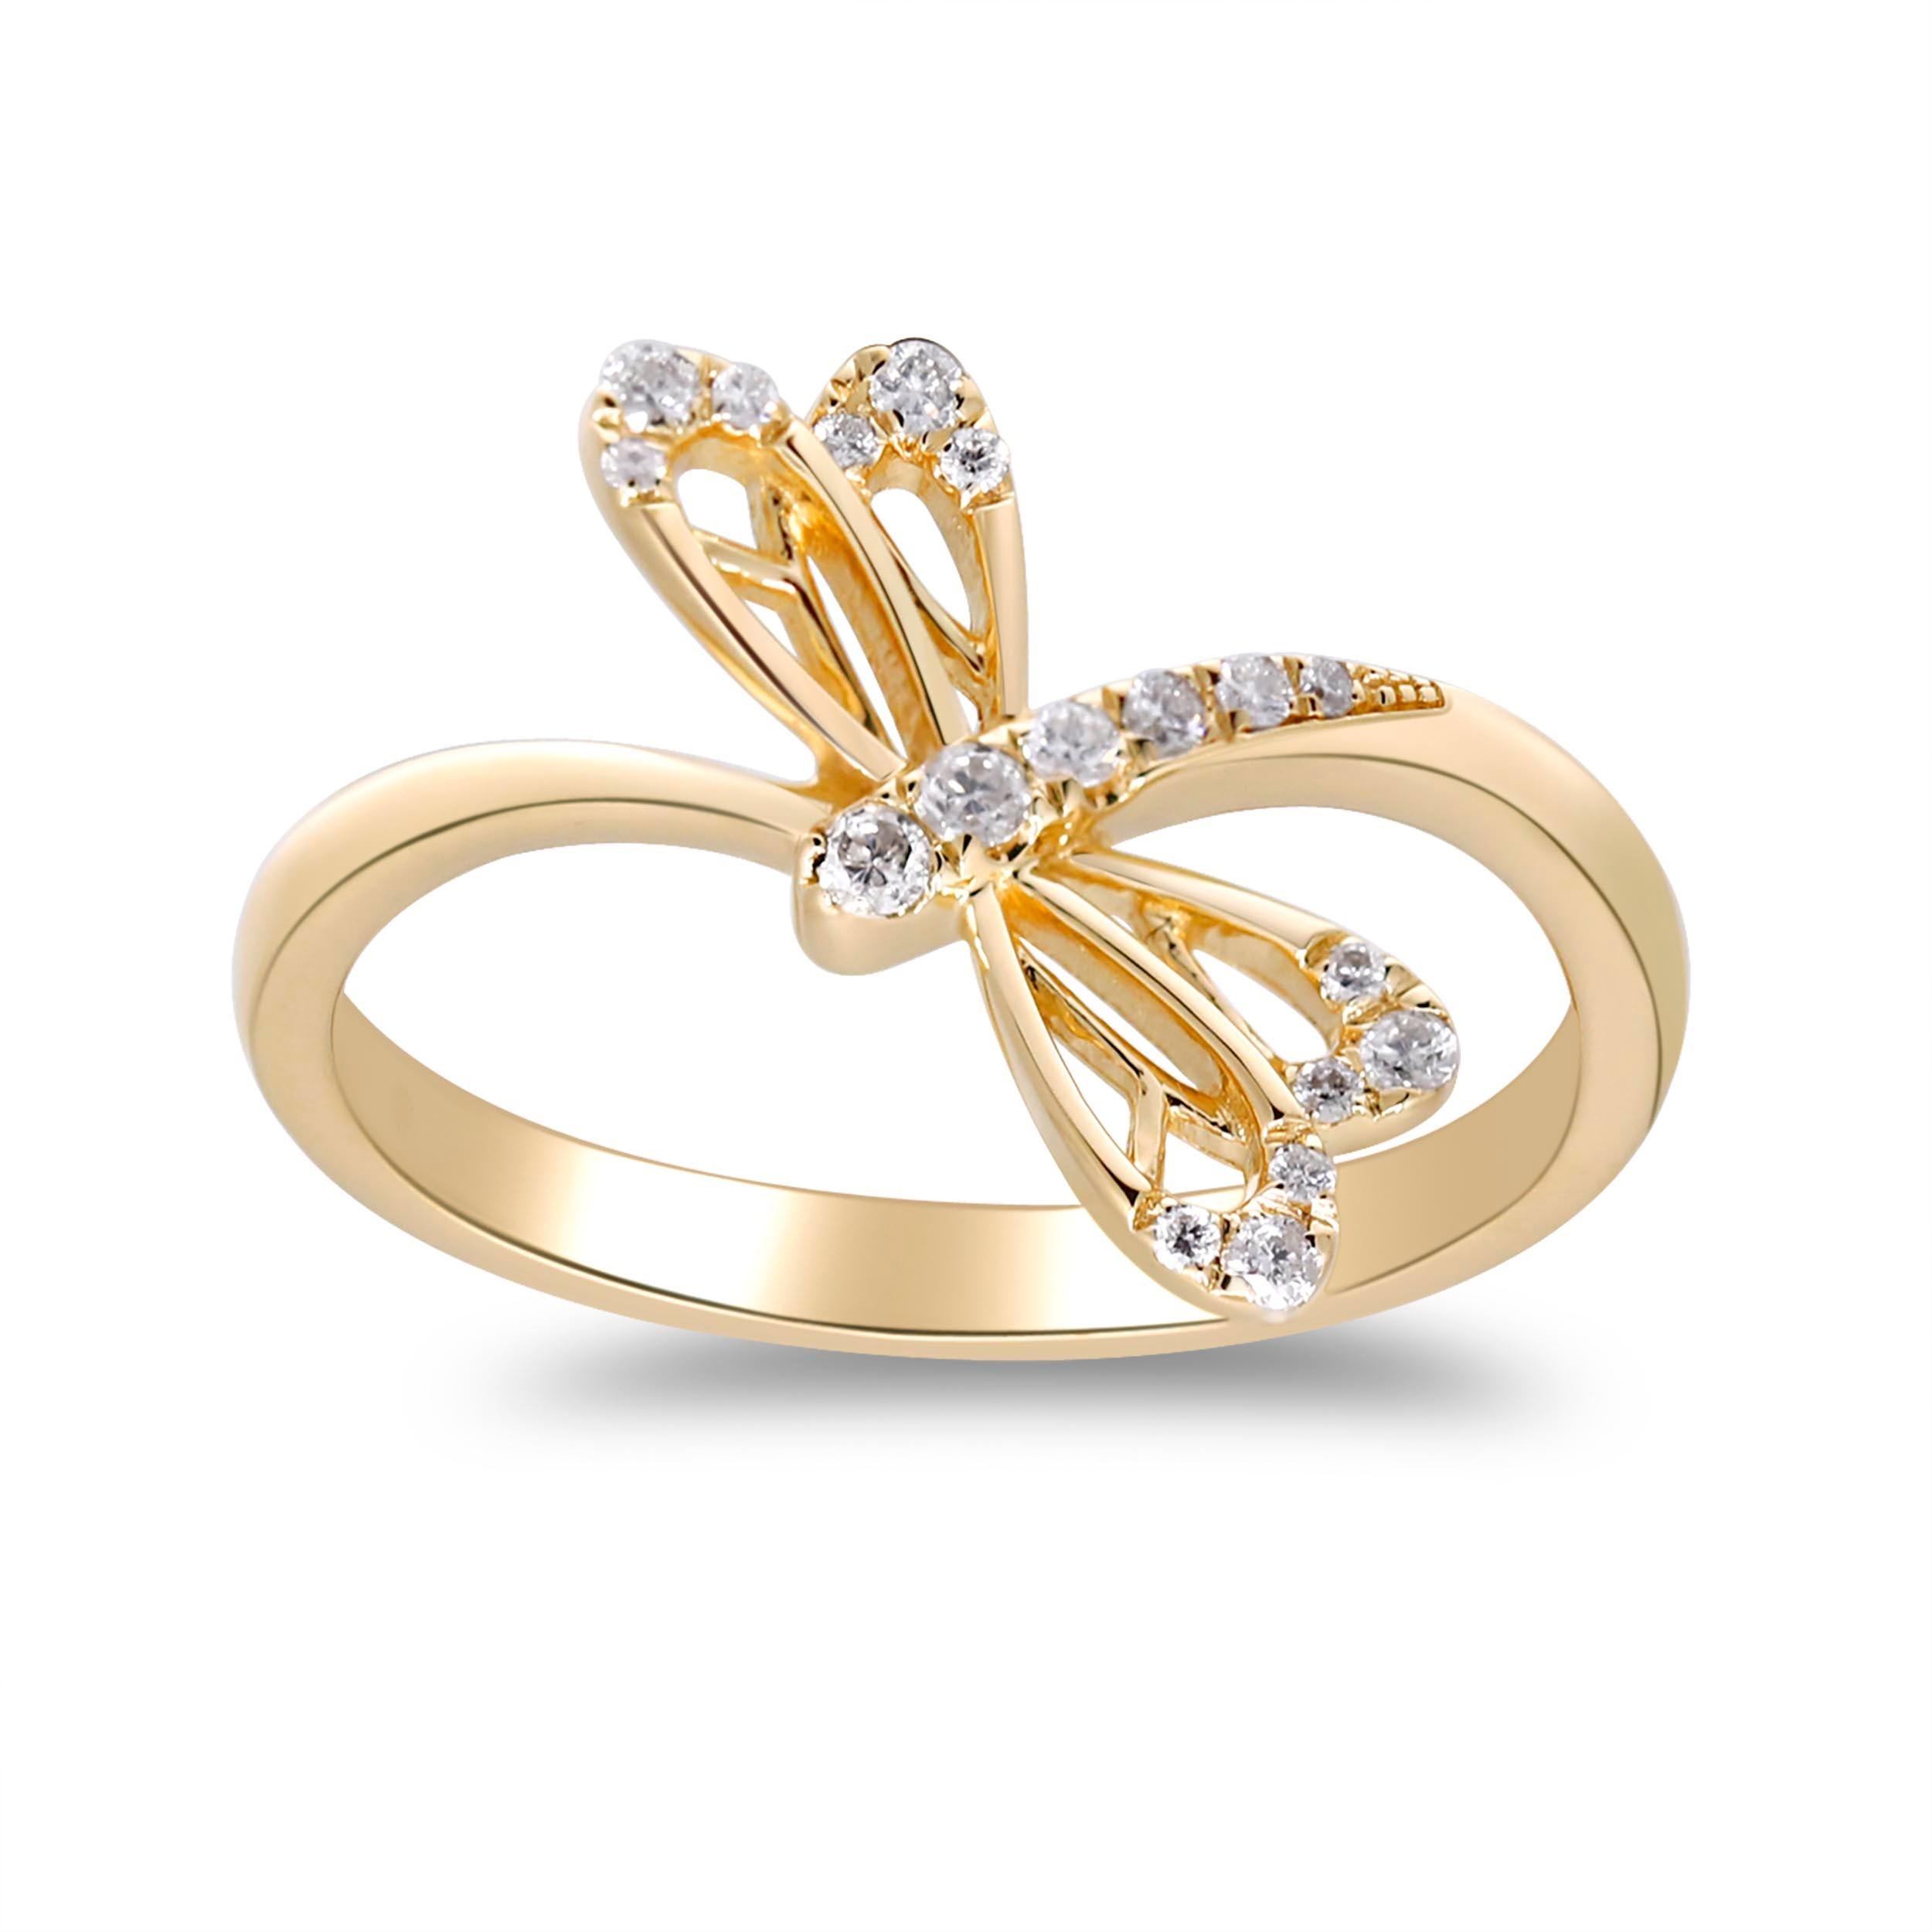 * The ethereal beauty of this incredible creature inspires a sense of wonder and respect for nature's fluttering friends. our Dragonfly Ring lands on a sleek 14K Yellow gold band with intricately detailed, open wings encrusted with brilliant round